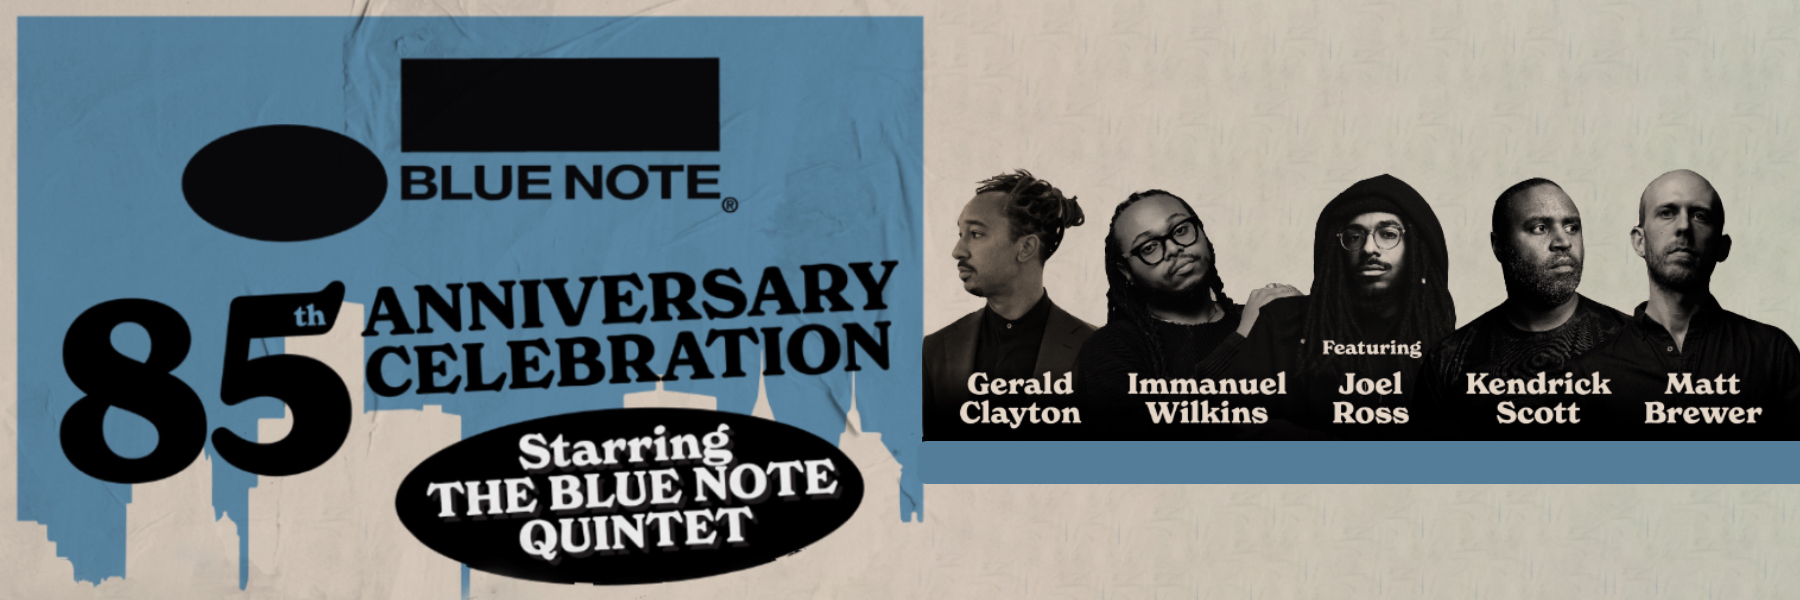 Blue Note Records 85th Anniversary Tour | Official Box Office